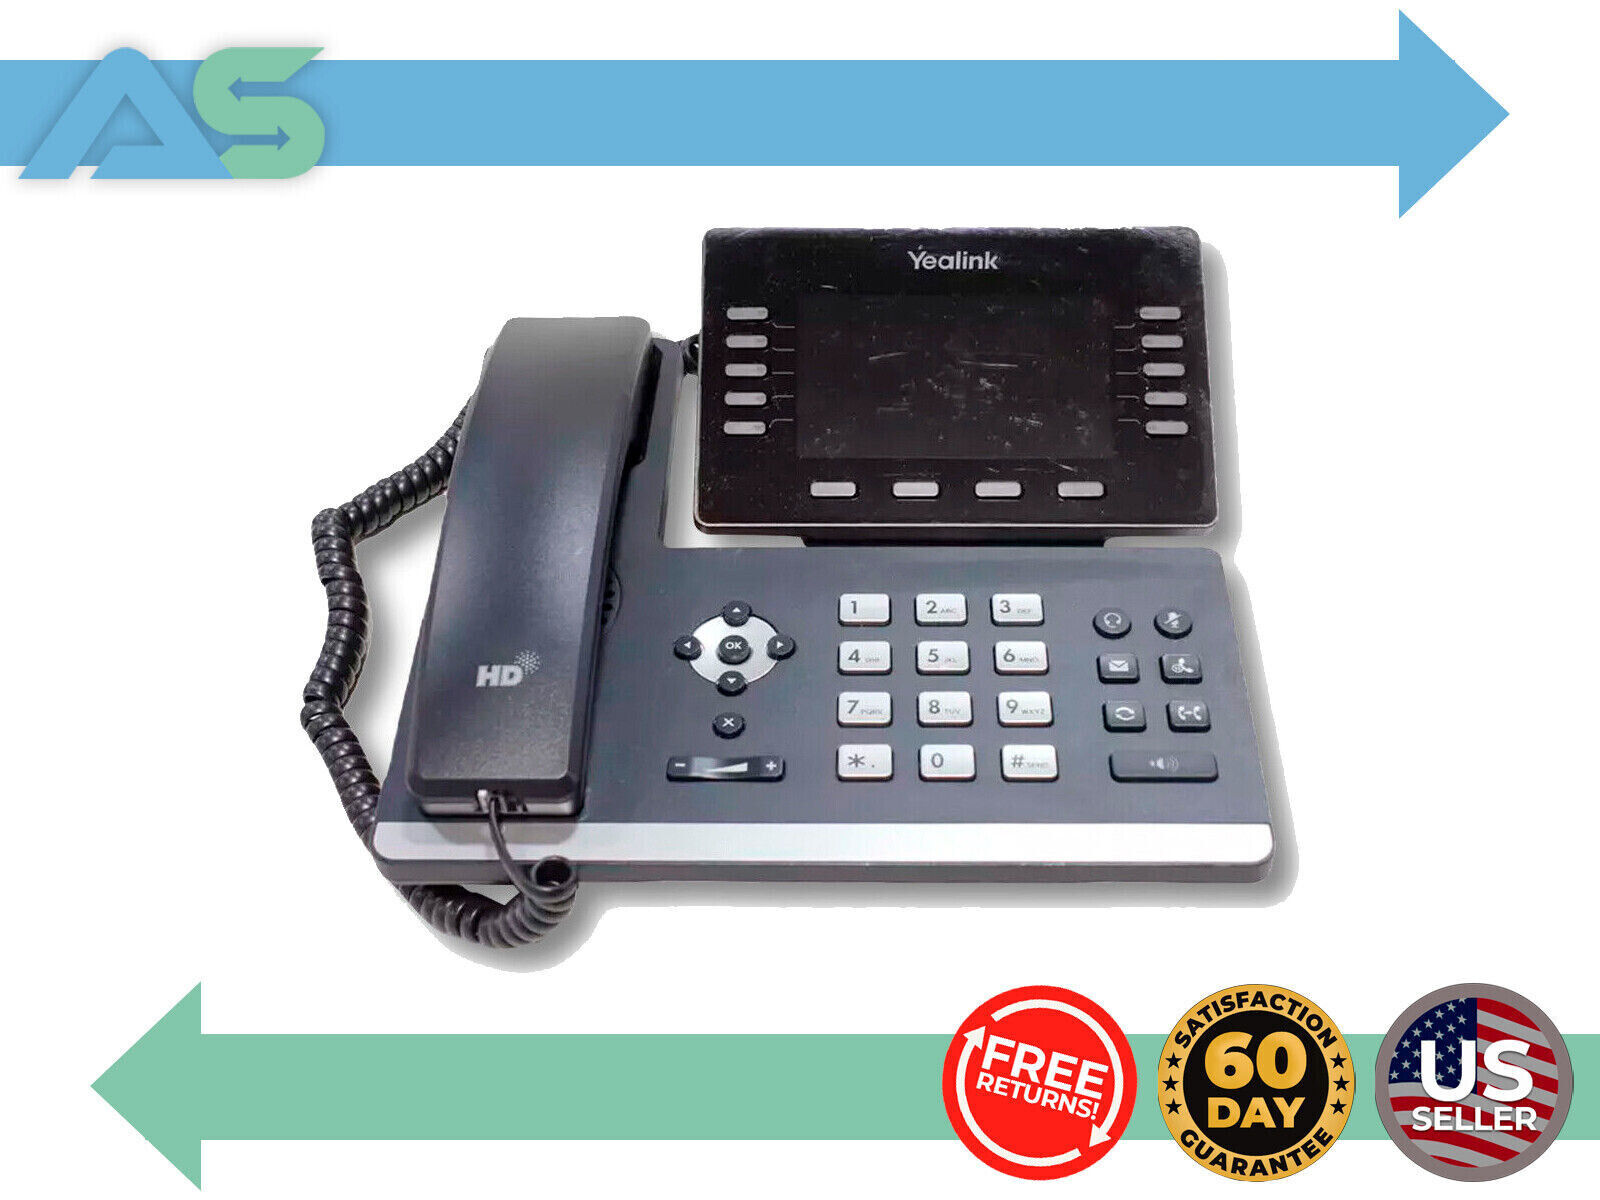 Yealink SIP-T54W 16-Line Color Display Business VoIP Phone /w Built-in Bluetooth